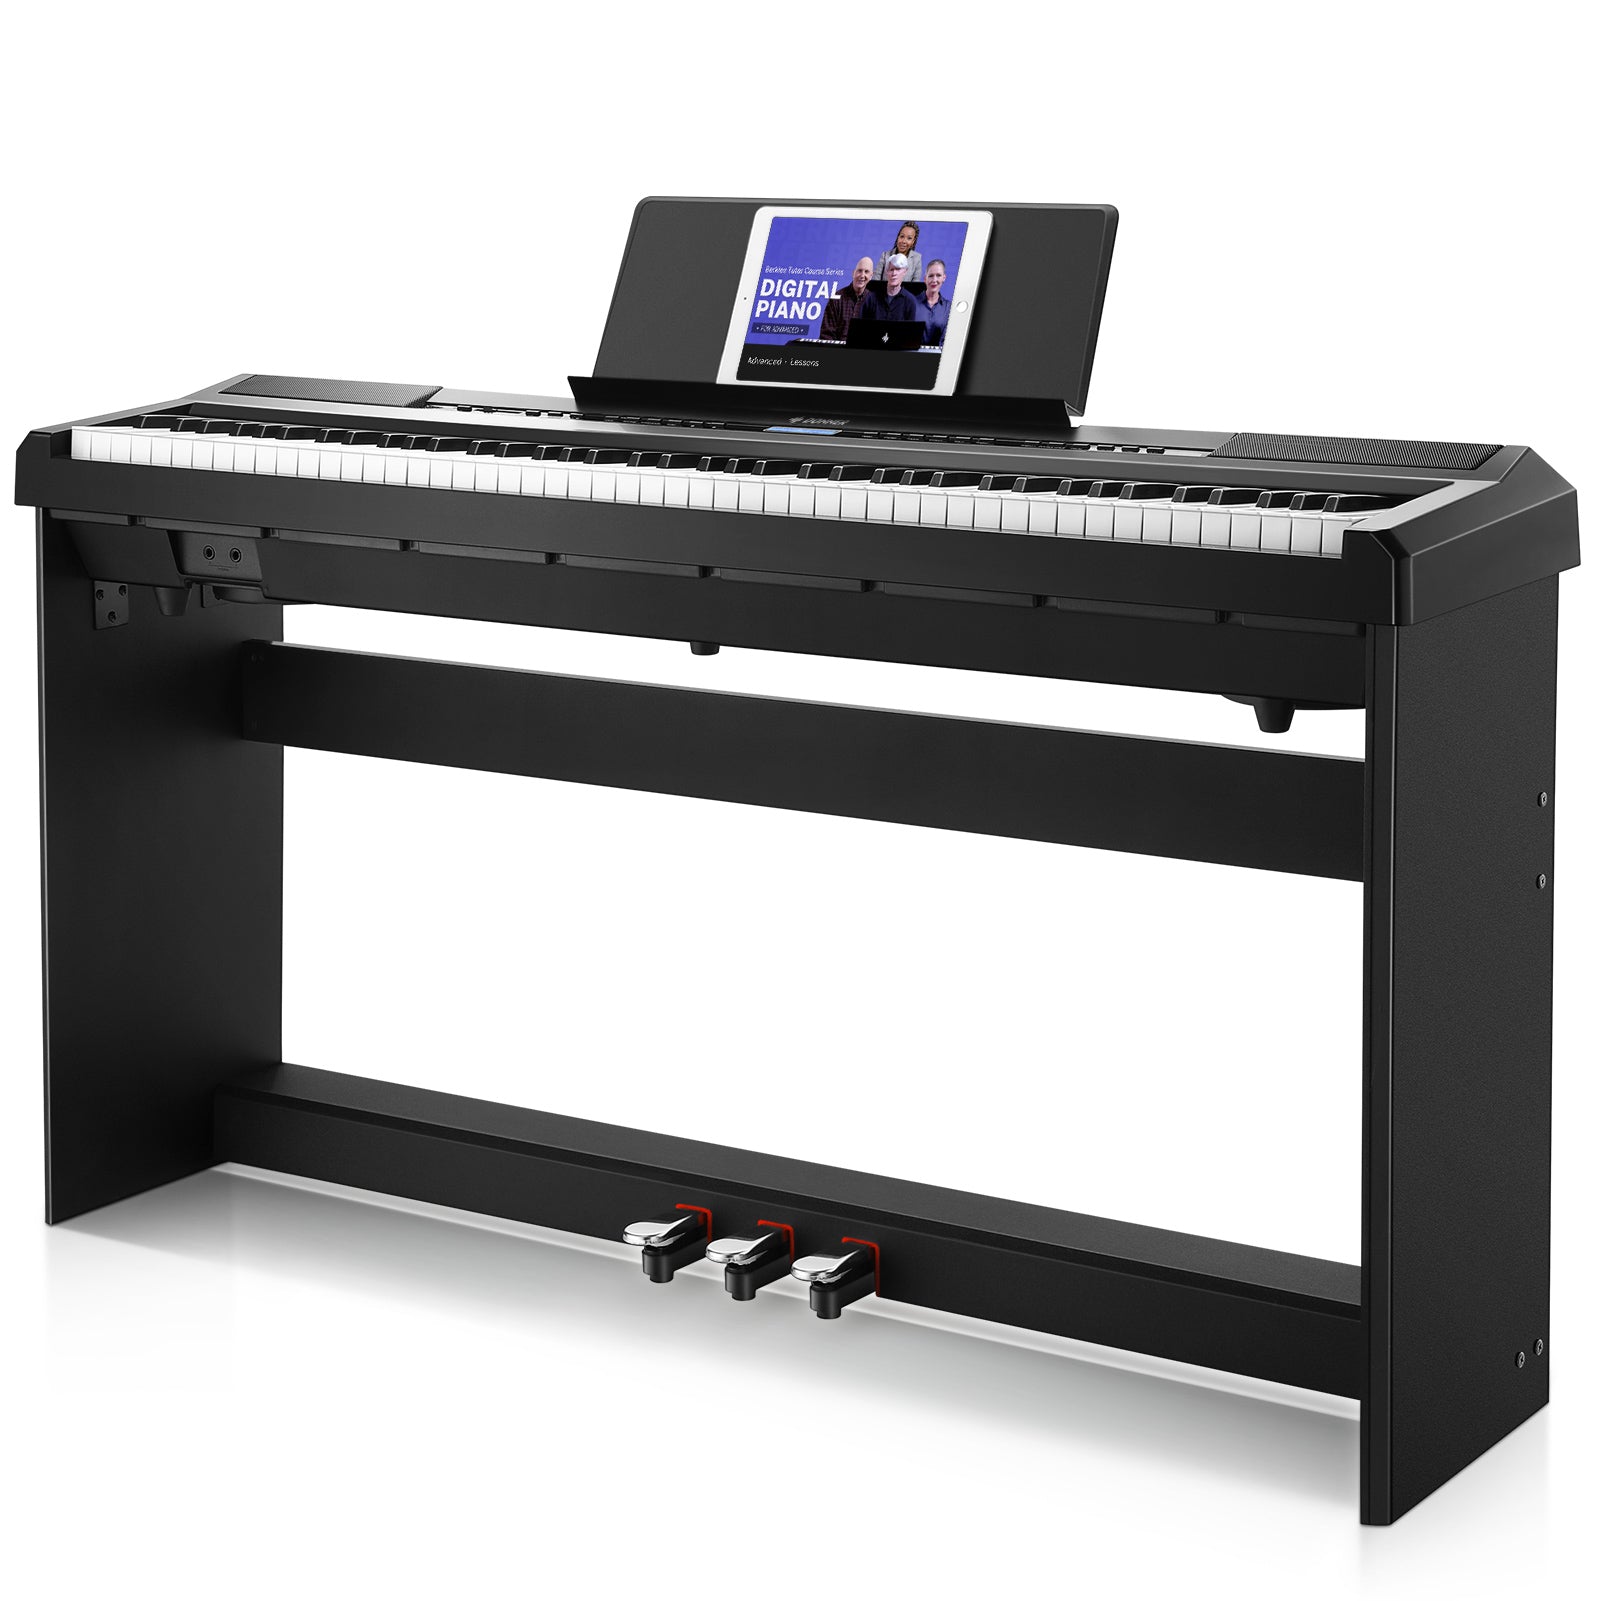 

Donner DEP-20 Portable 88 Key Weighted Digital Piano with Detachable Furniture Stand & 3 Pedals